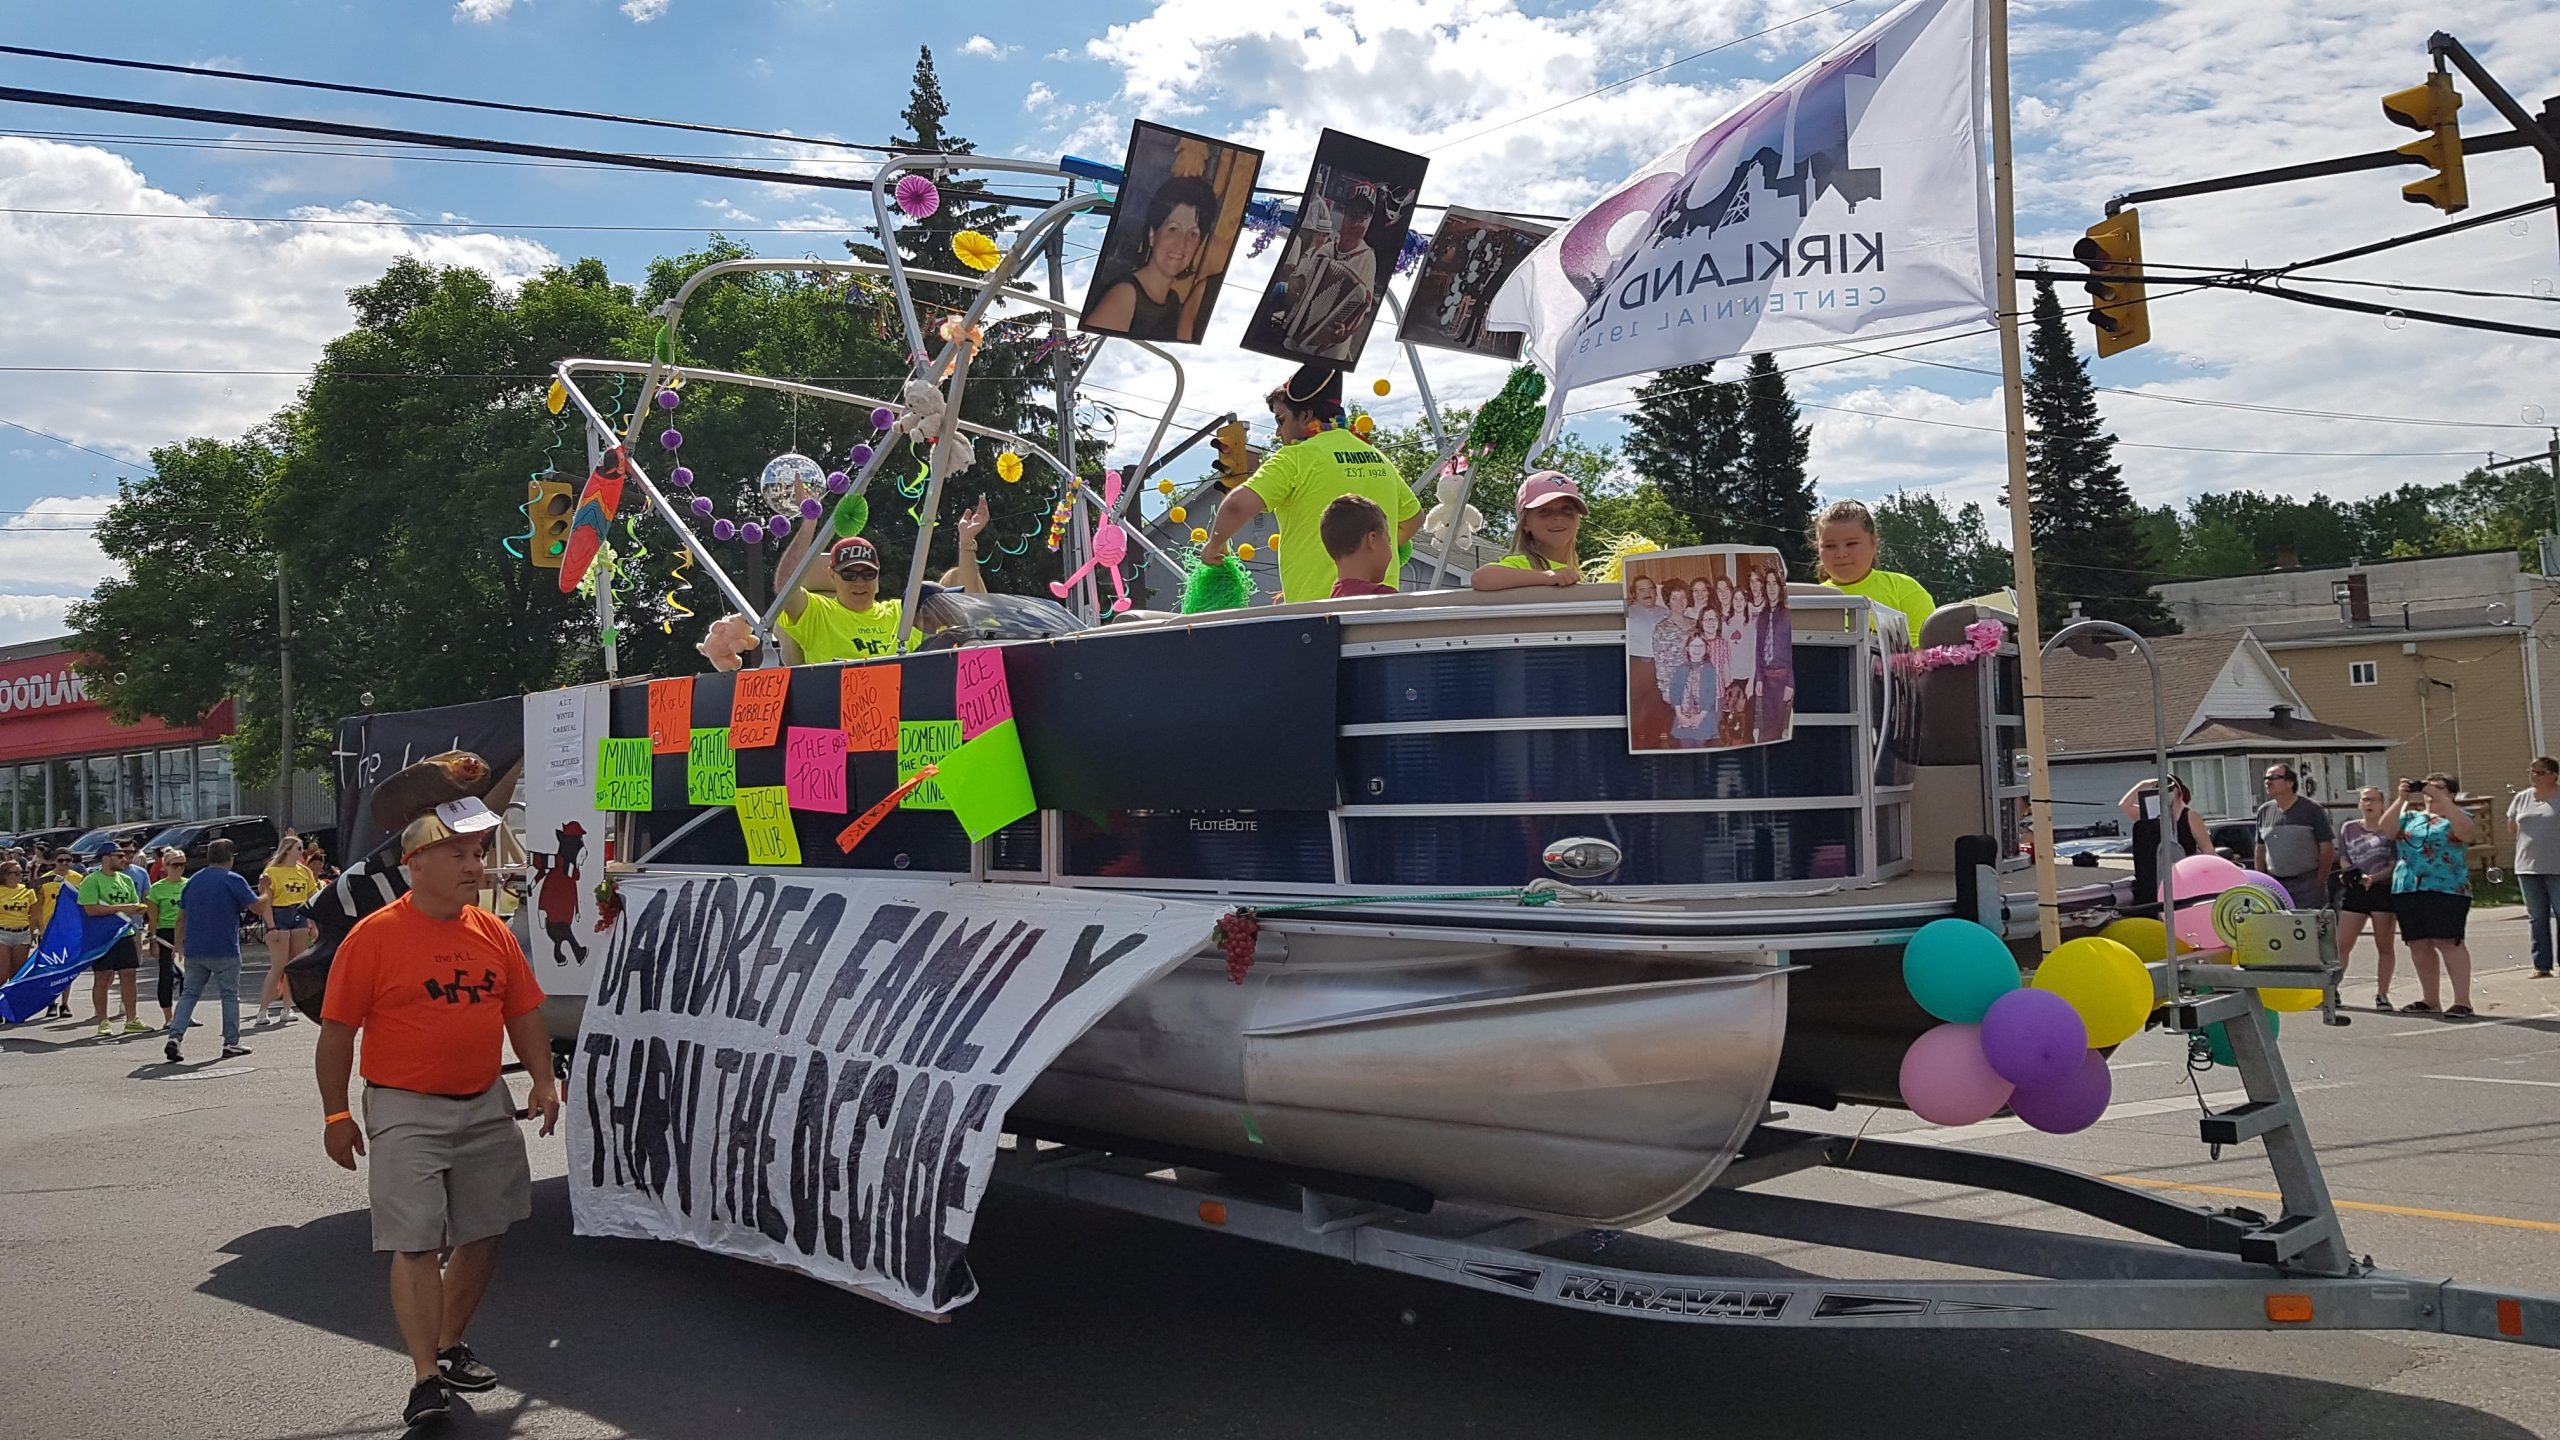 Colour photograph of a large pontoon boat on a trailer is pulled through the street as a float in a parade. The float is decorated with a banner titled D'Andrea Family Thru the Decades hanging off the side with other decorations. At least five people are visible in the float.